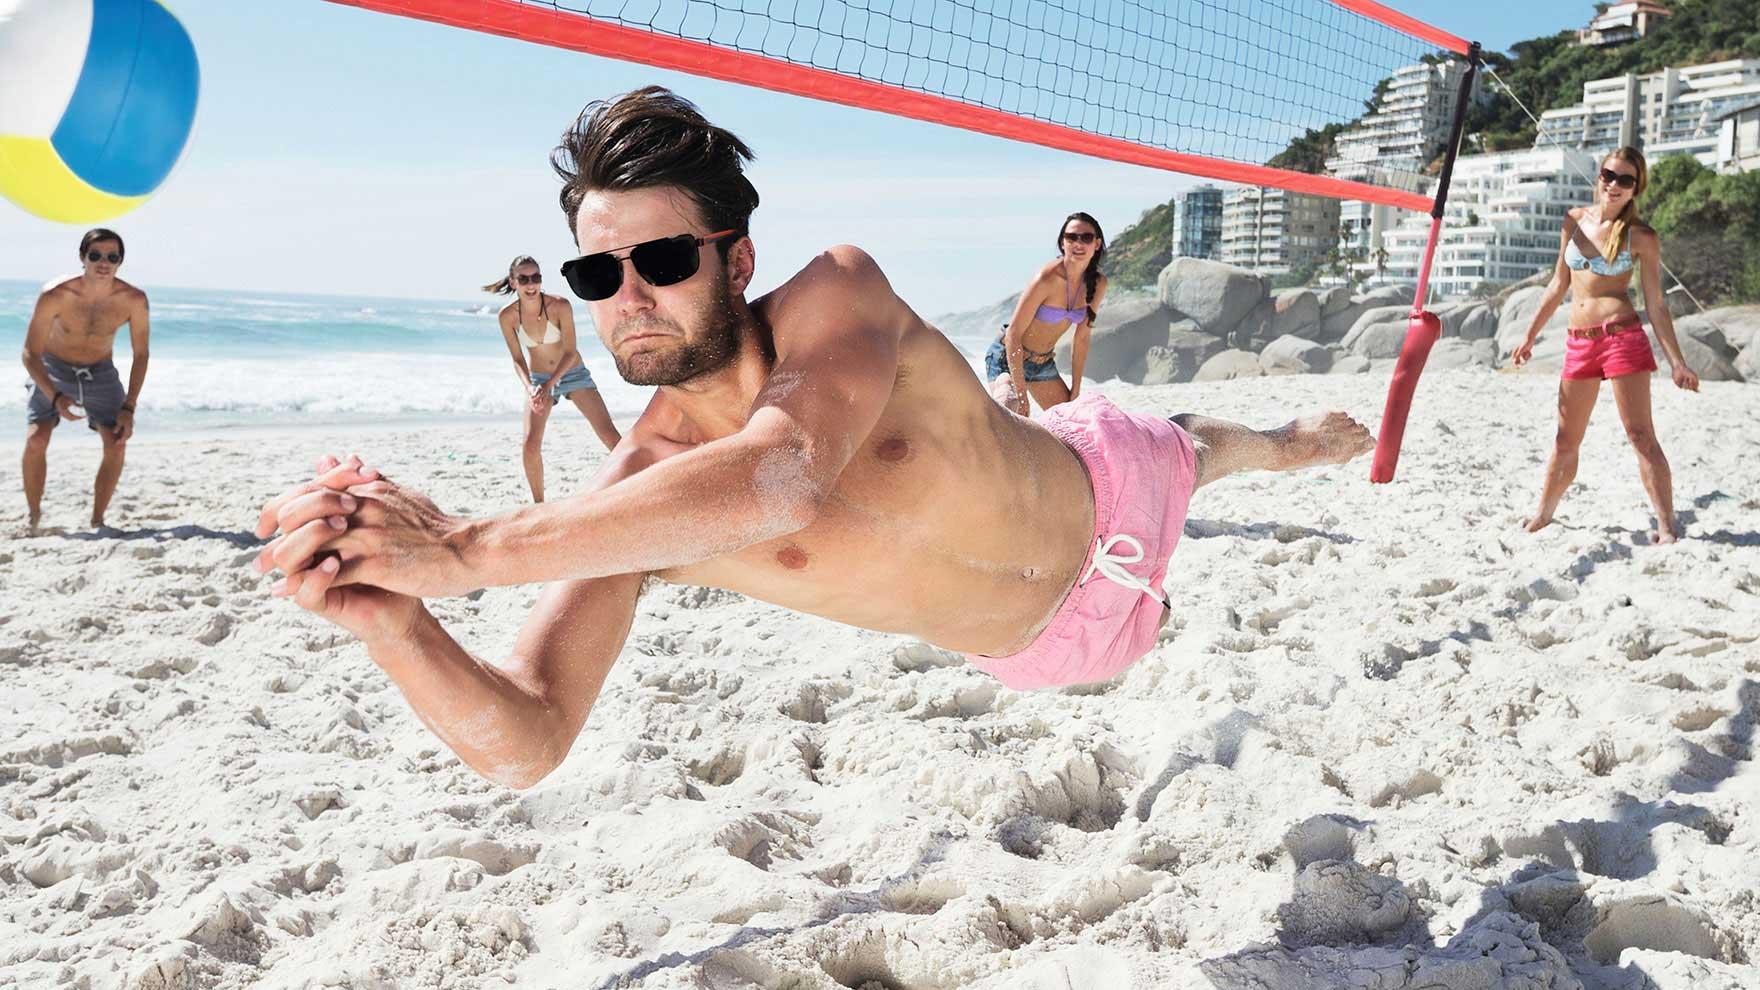 People at the beach playing beach volleyball